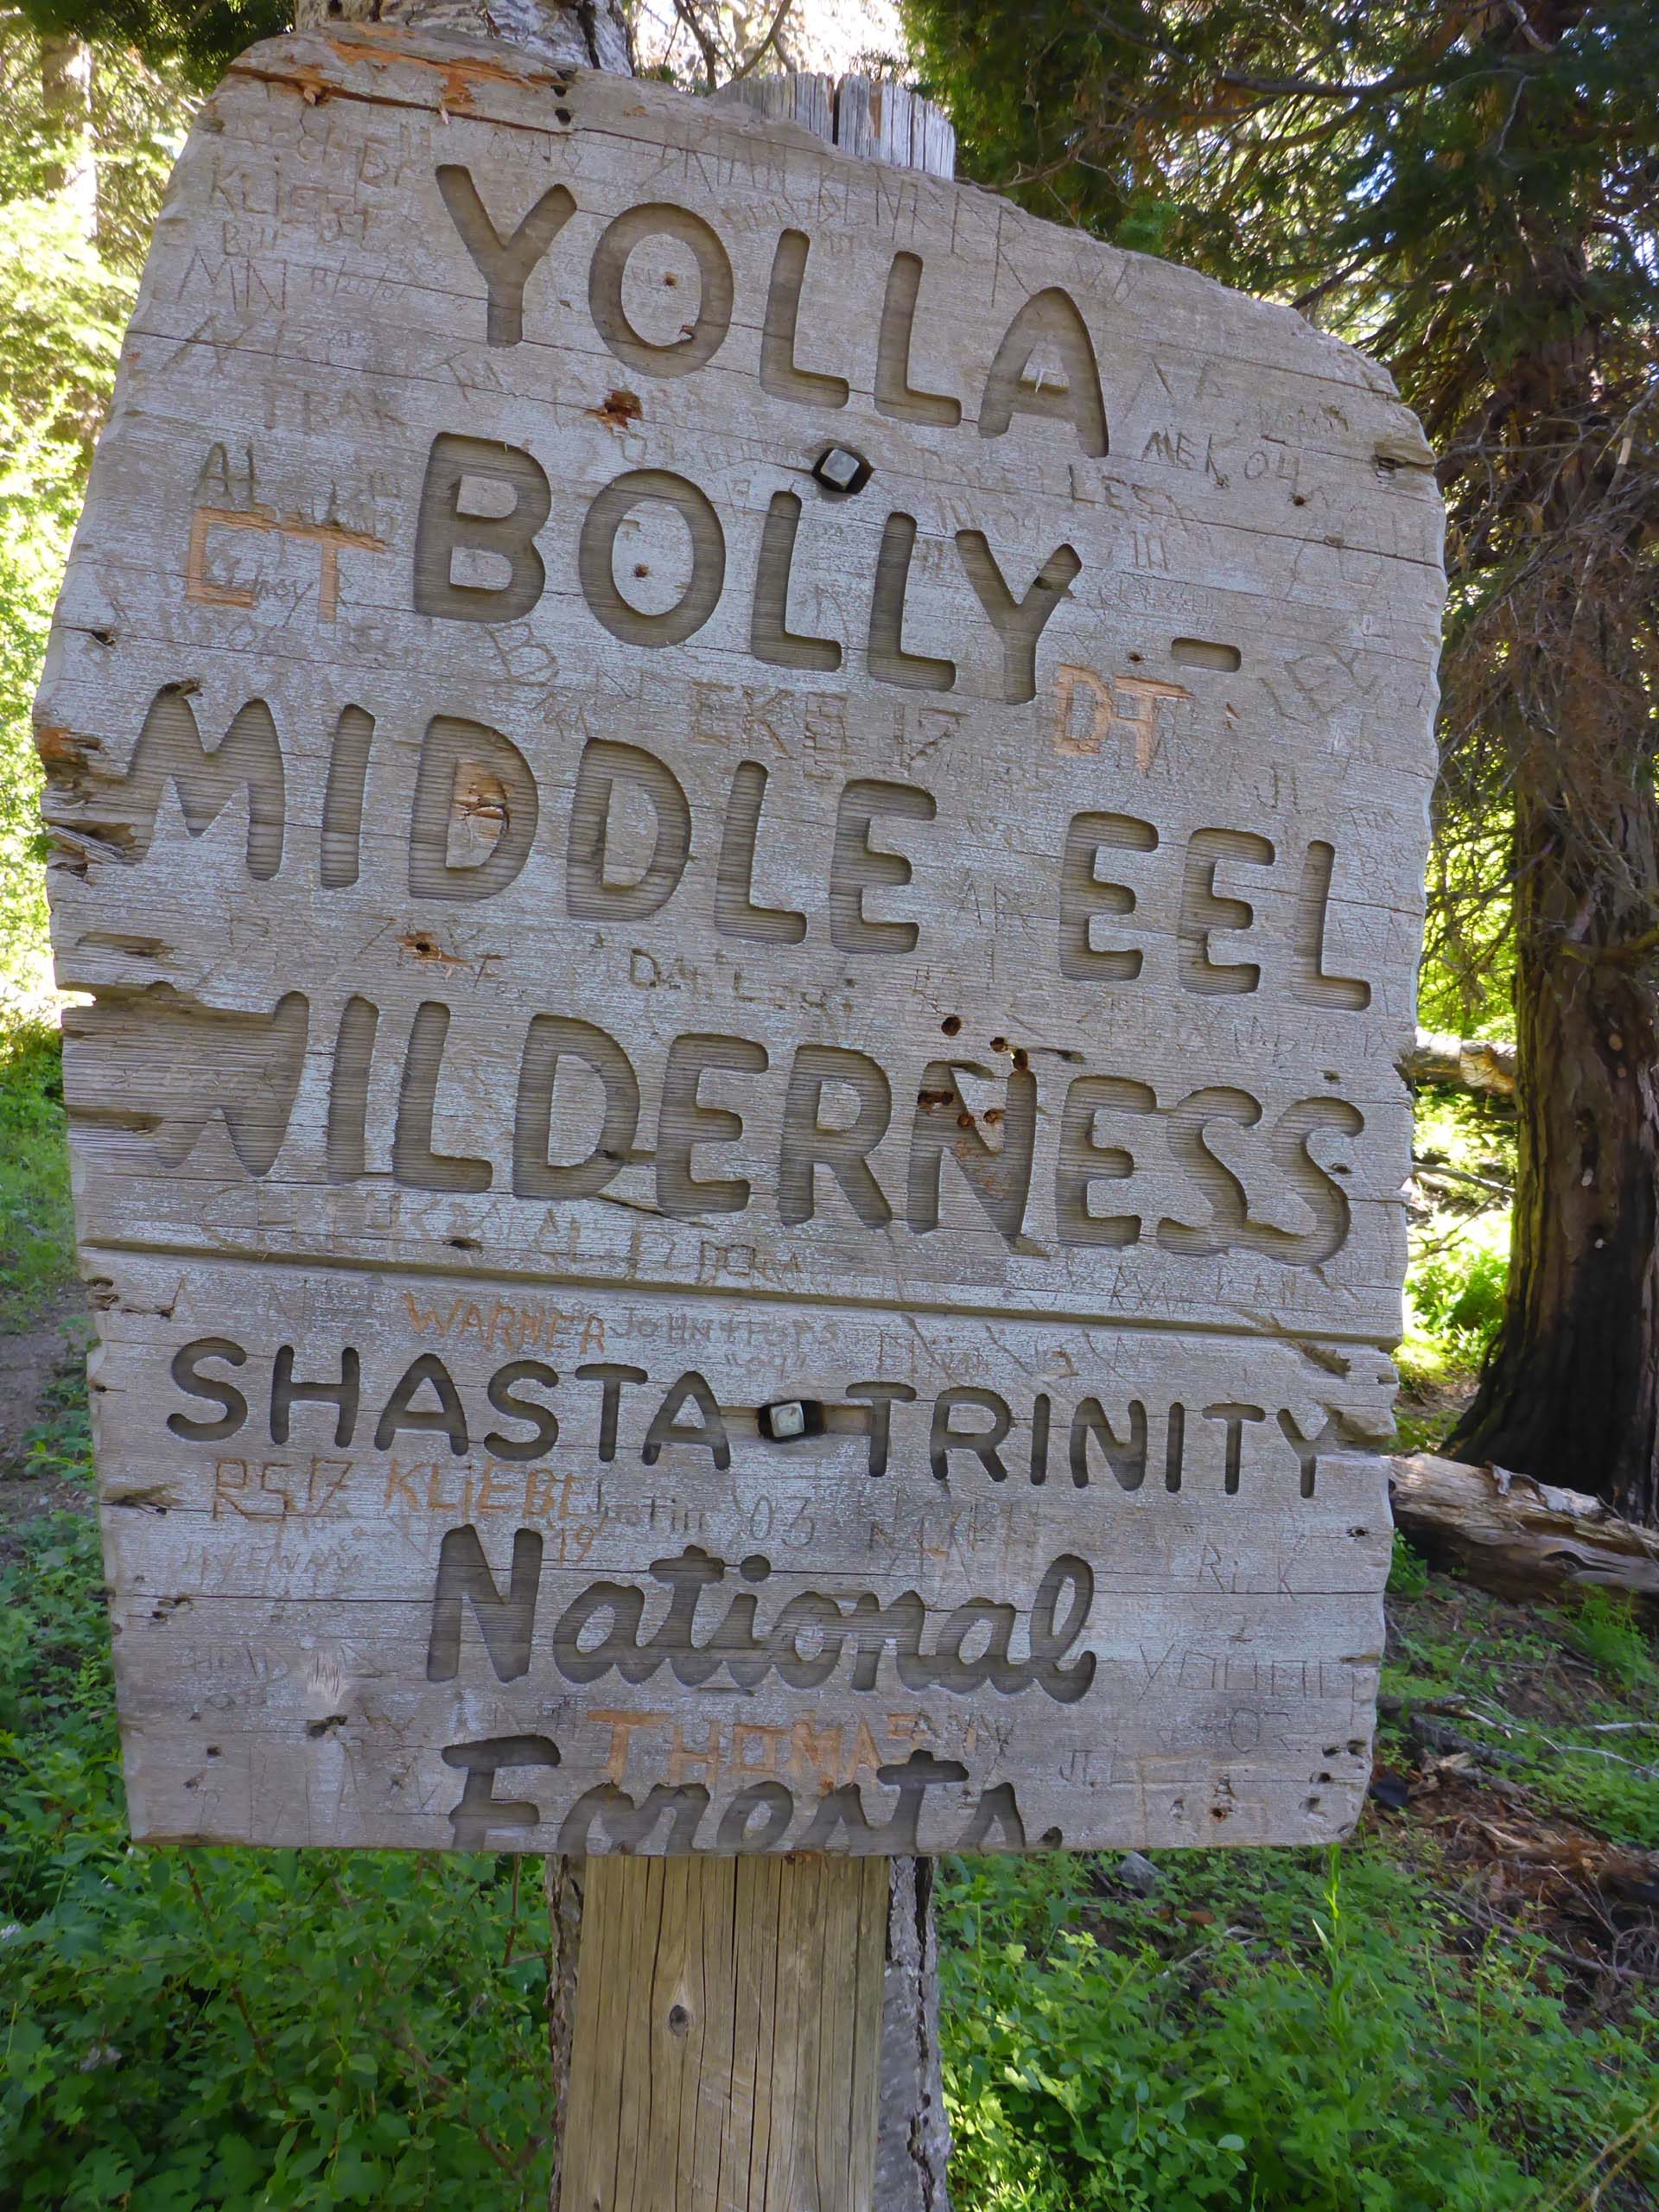 Yolla Bolly-Middle Eel Wilderness boundary sign. D. Burk.